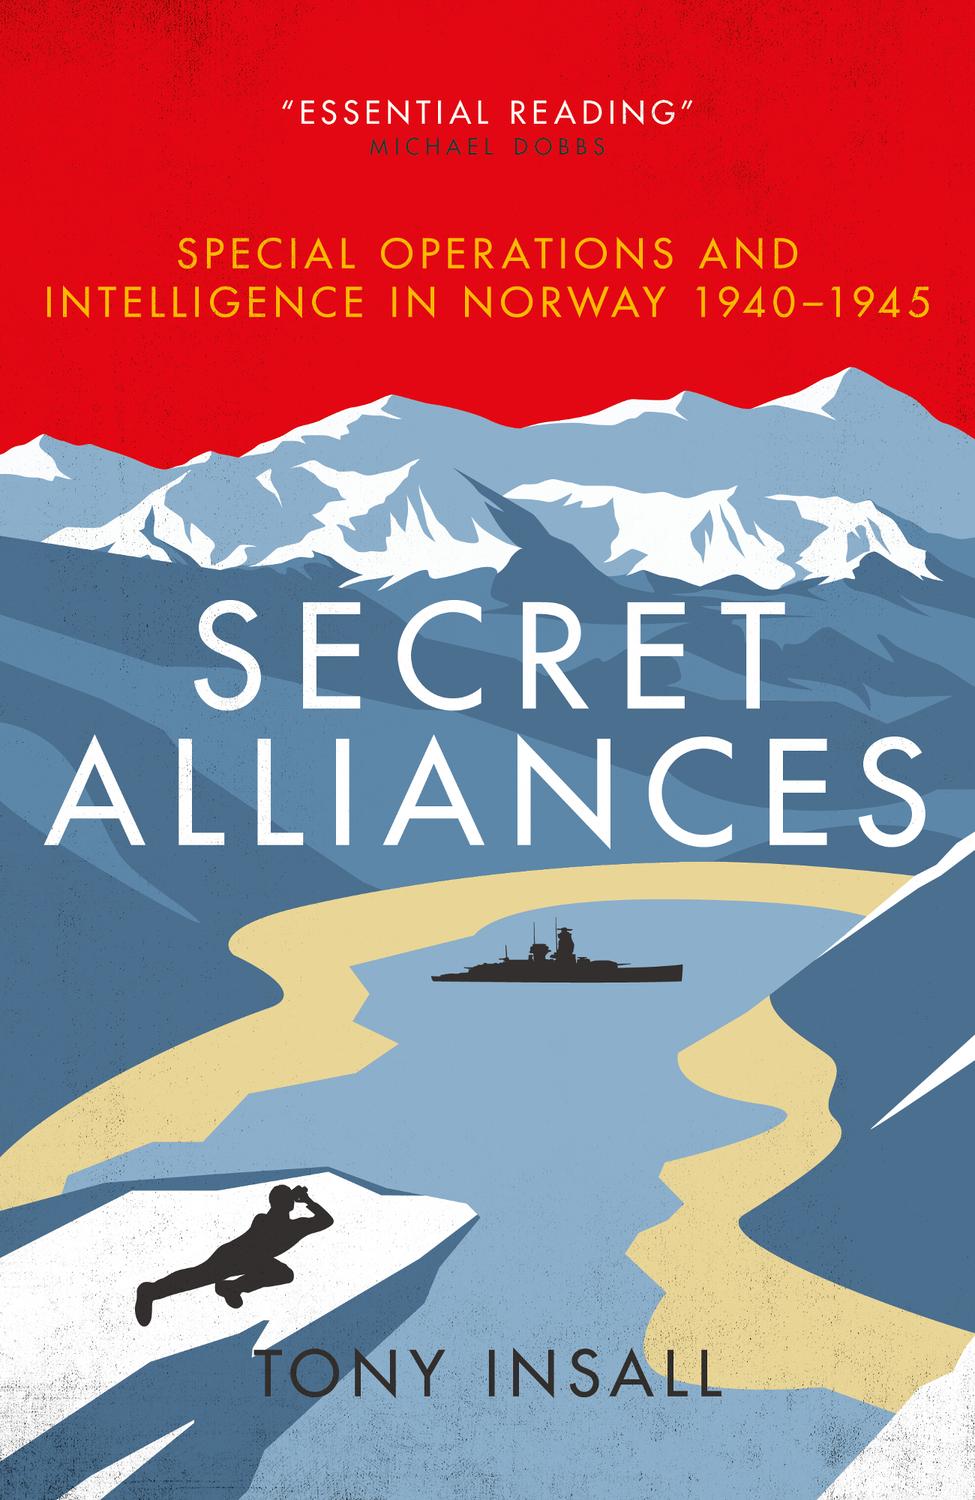 Secret alliances : special operations and intelligence in Norway 1940-1945 - the British perspective